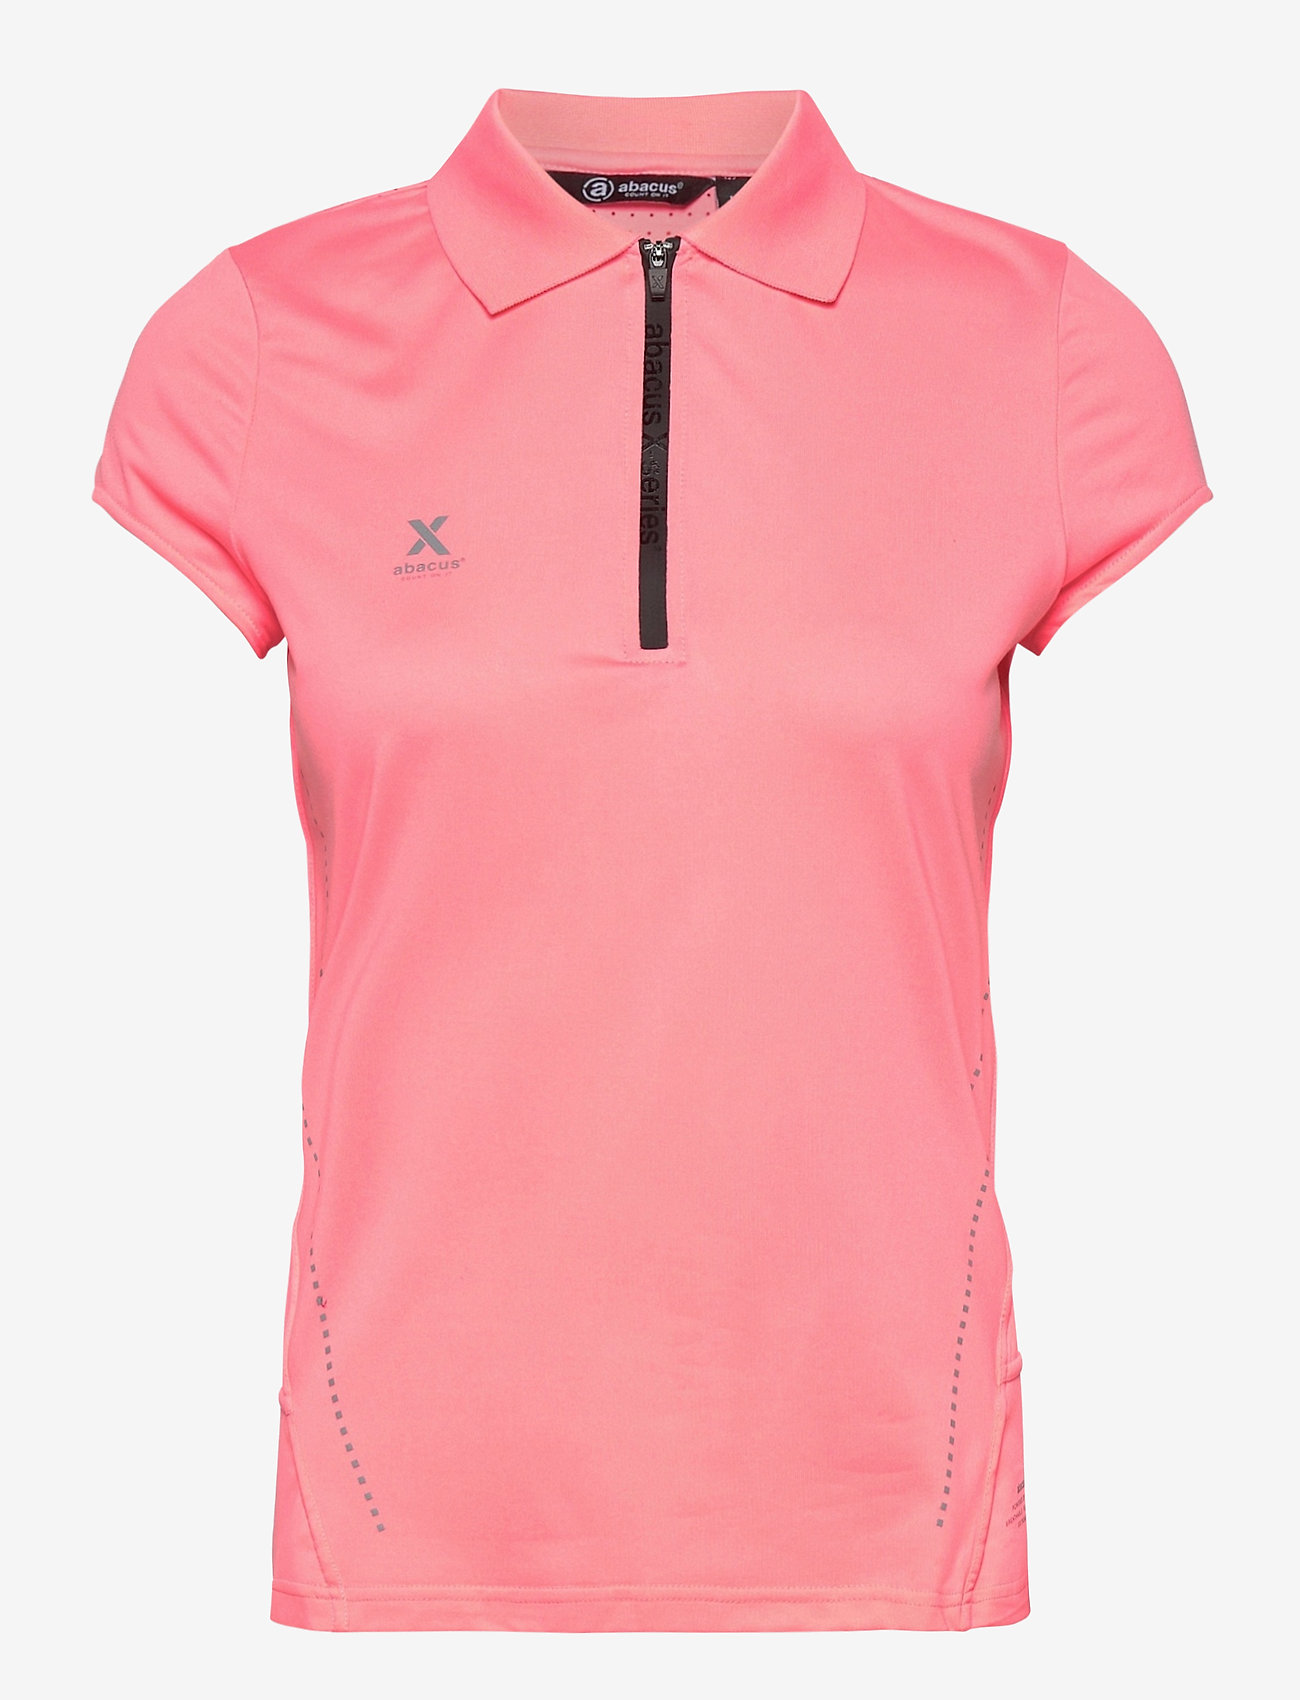 Abacus - Lds Scratch 37.5 cupsleeve - polo's - coral pink - 0